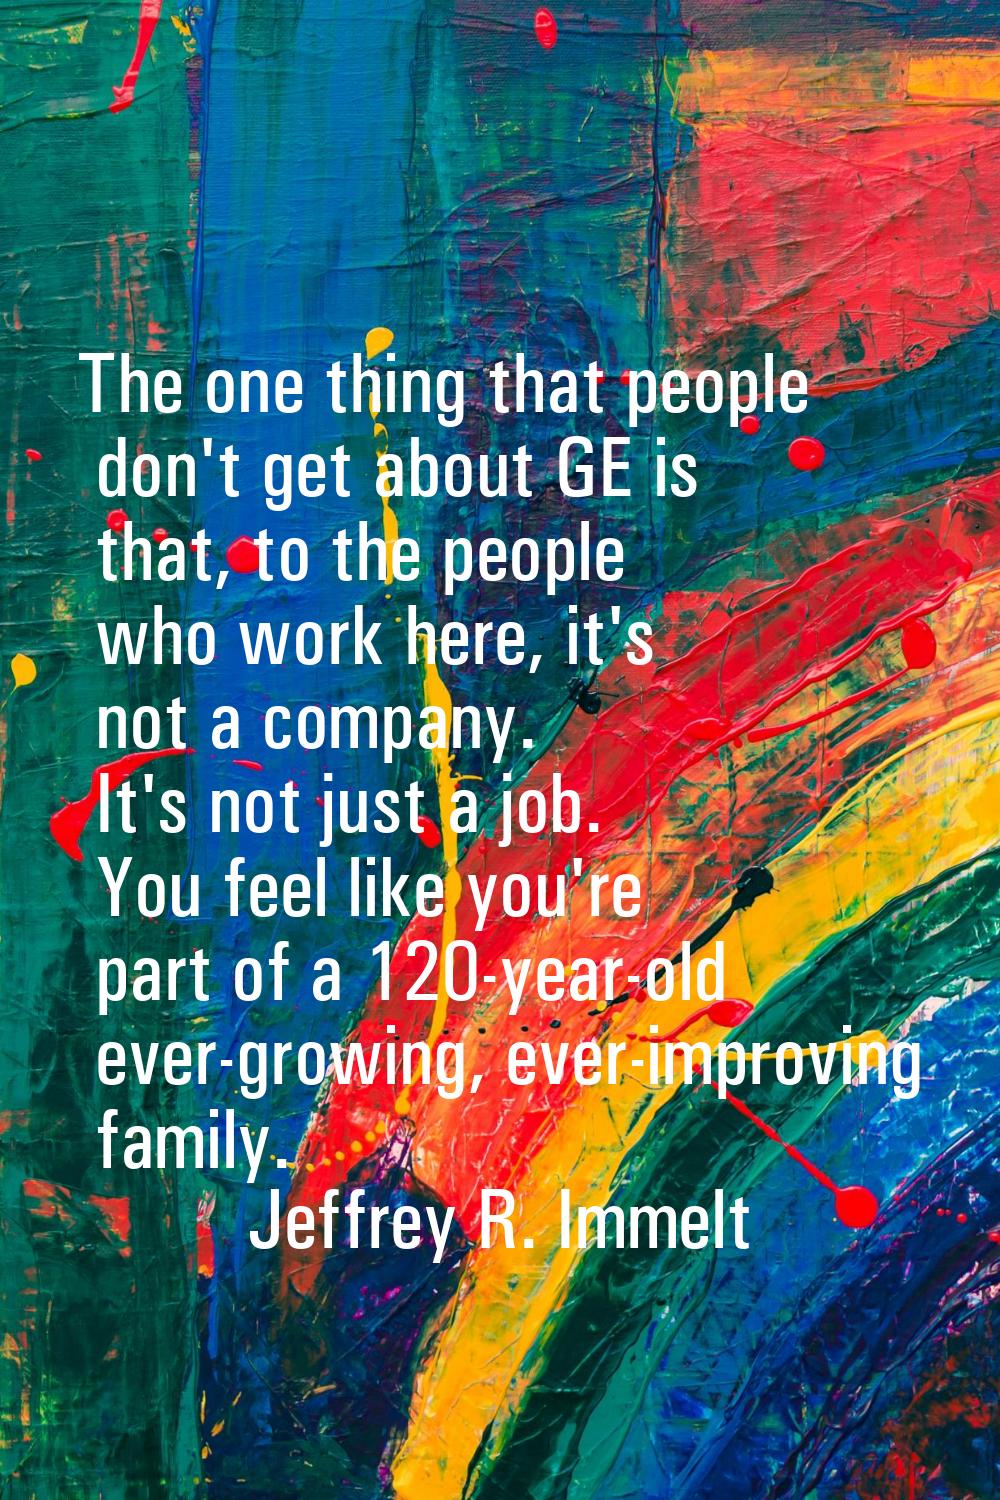 The one thing that people don't get about GE is that, to the people who work here, it's not a compa